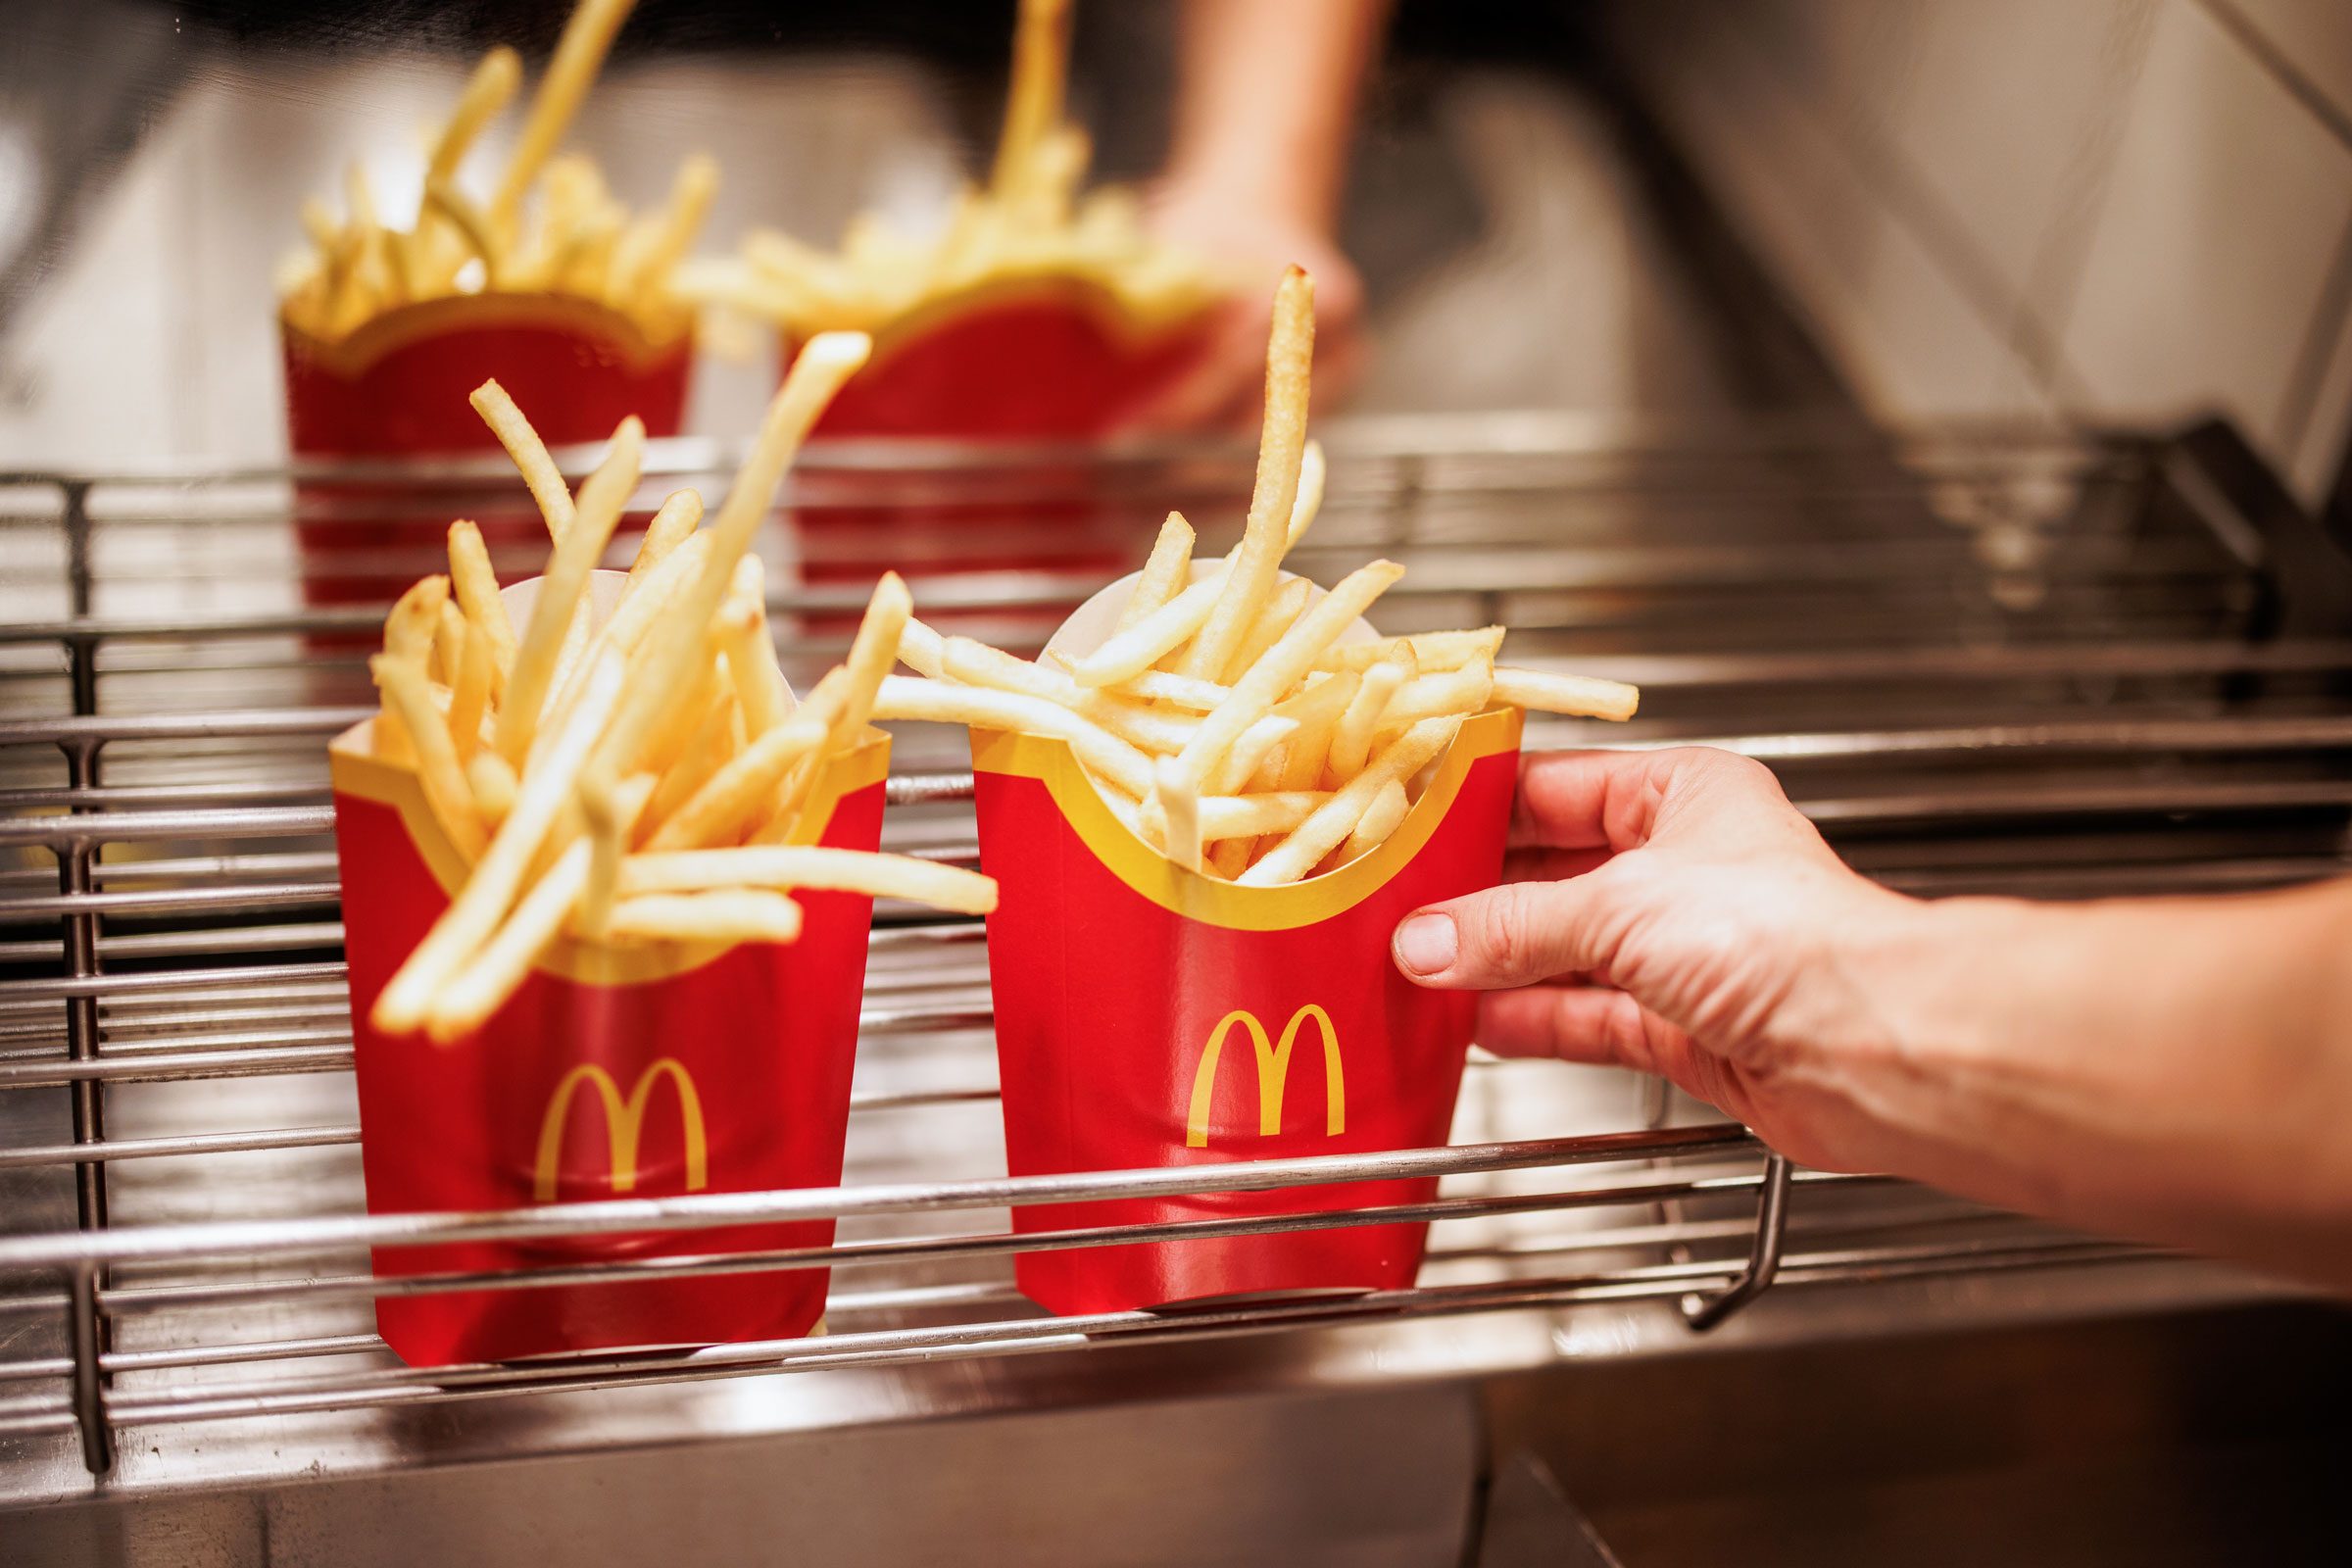 You've Got to See How Waffle Fries Are Actually Made